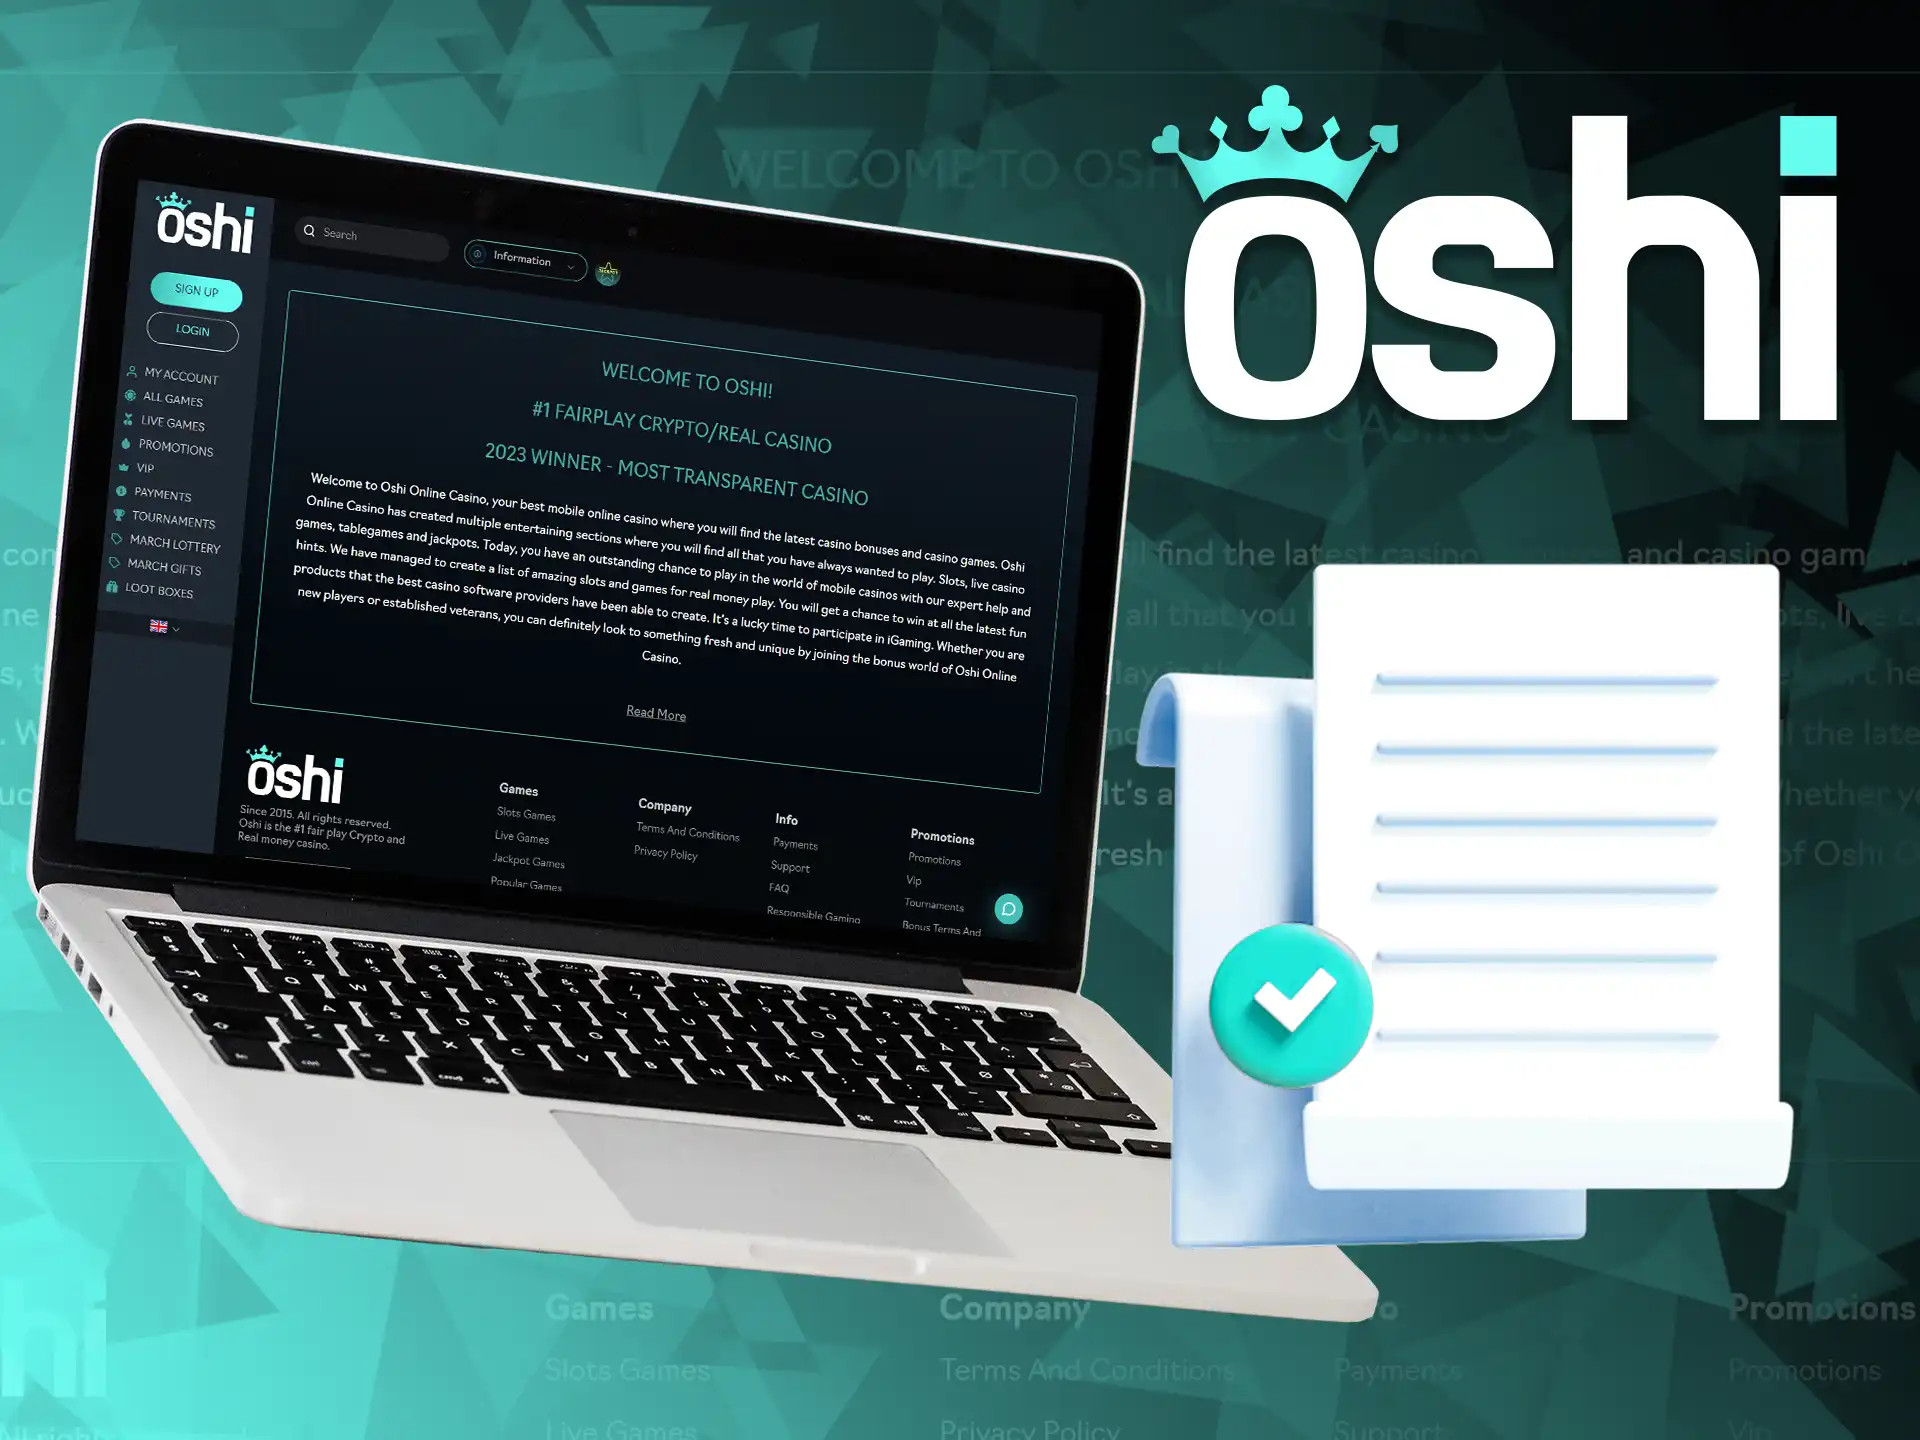 Oshi Online Casino complies with Curacao regulations, ensuring full legal compliance.